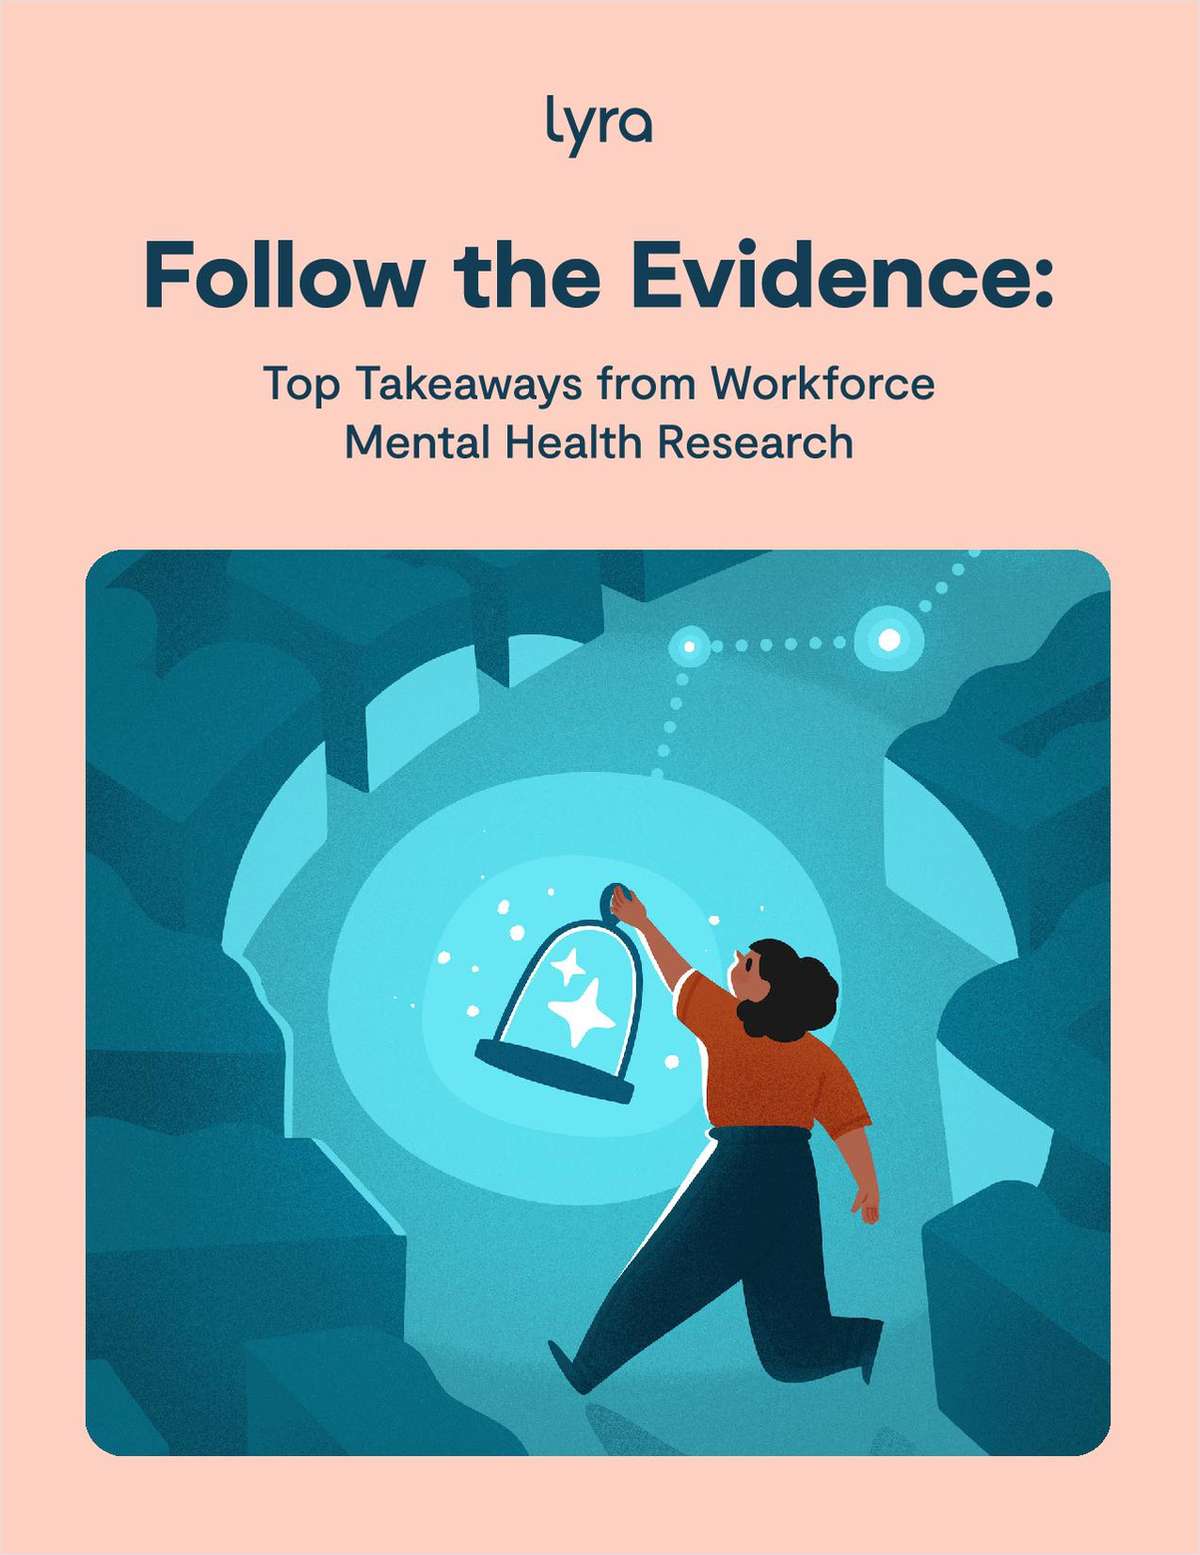 Follow the Evidence: Top Takeaways from New Employee Mental Health Research